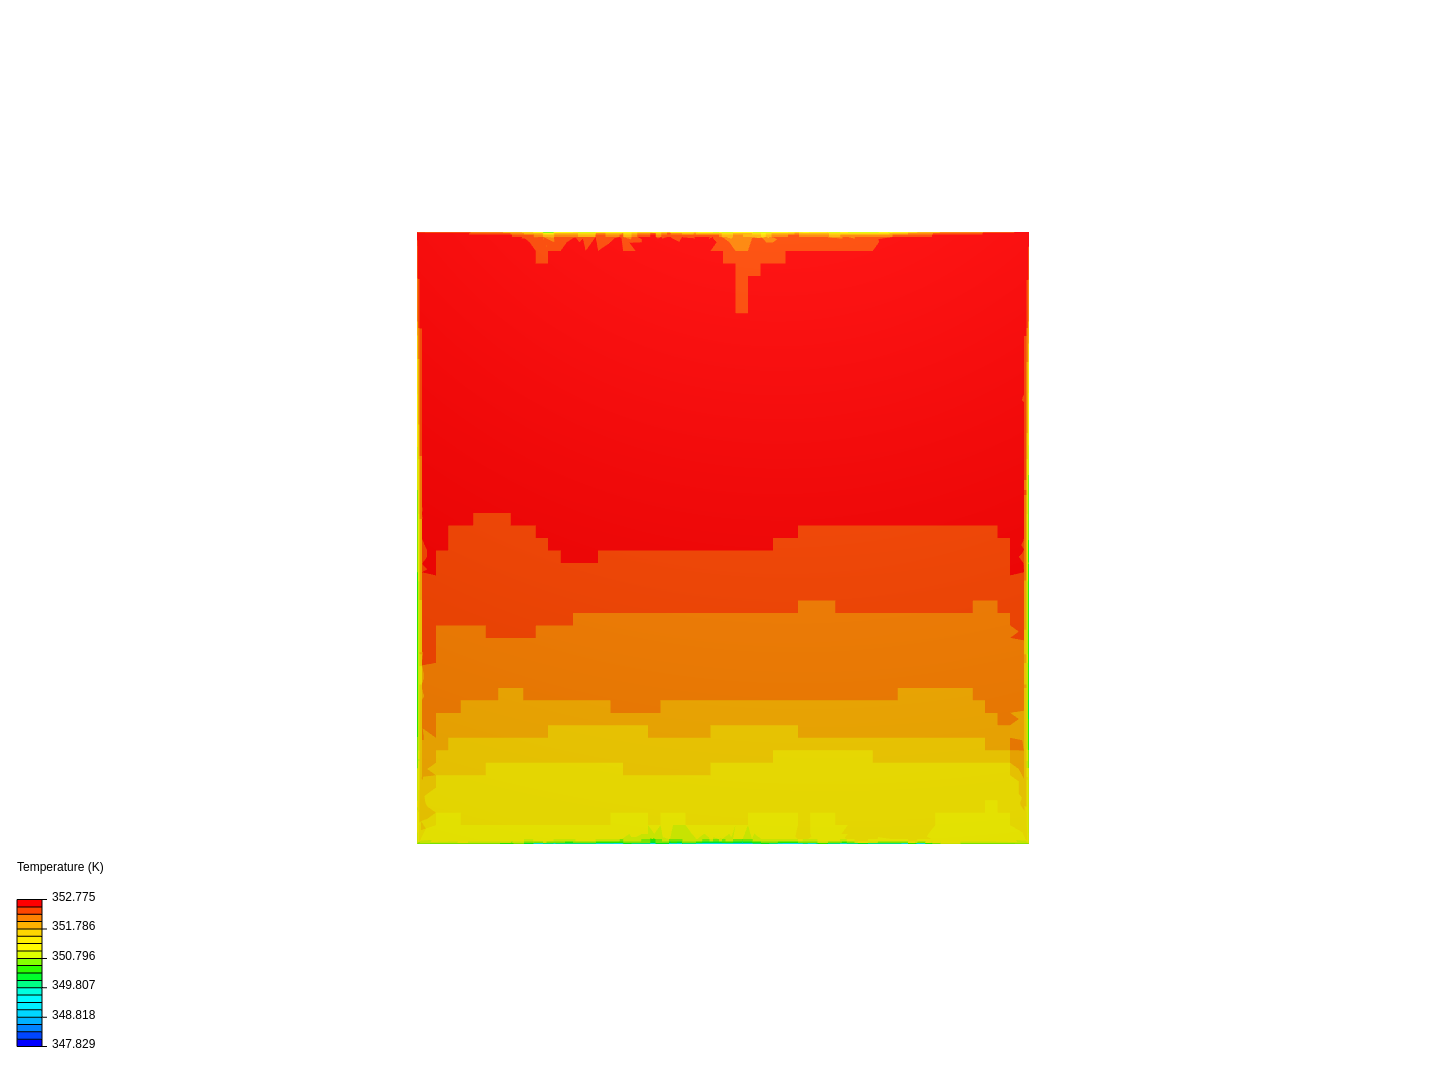 Cooling of a box image